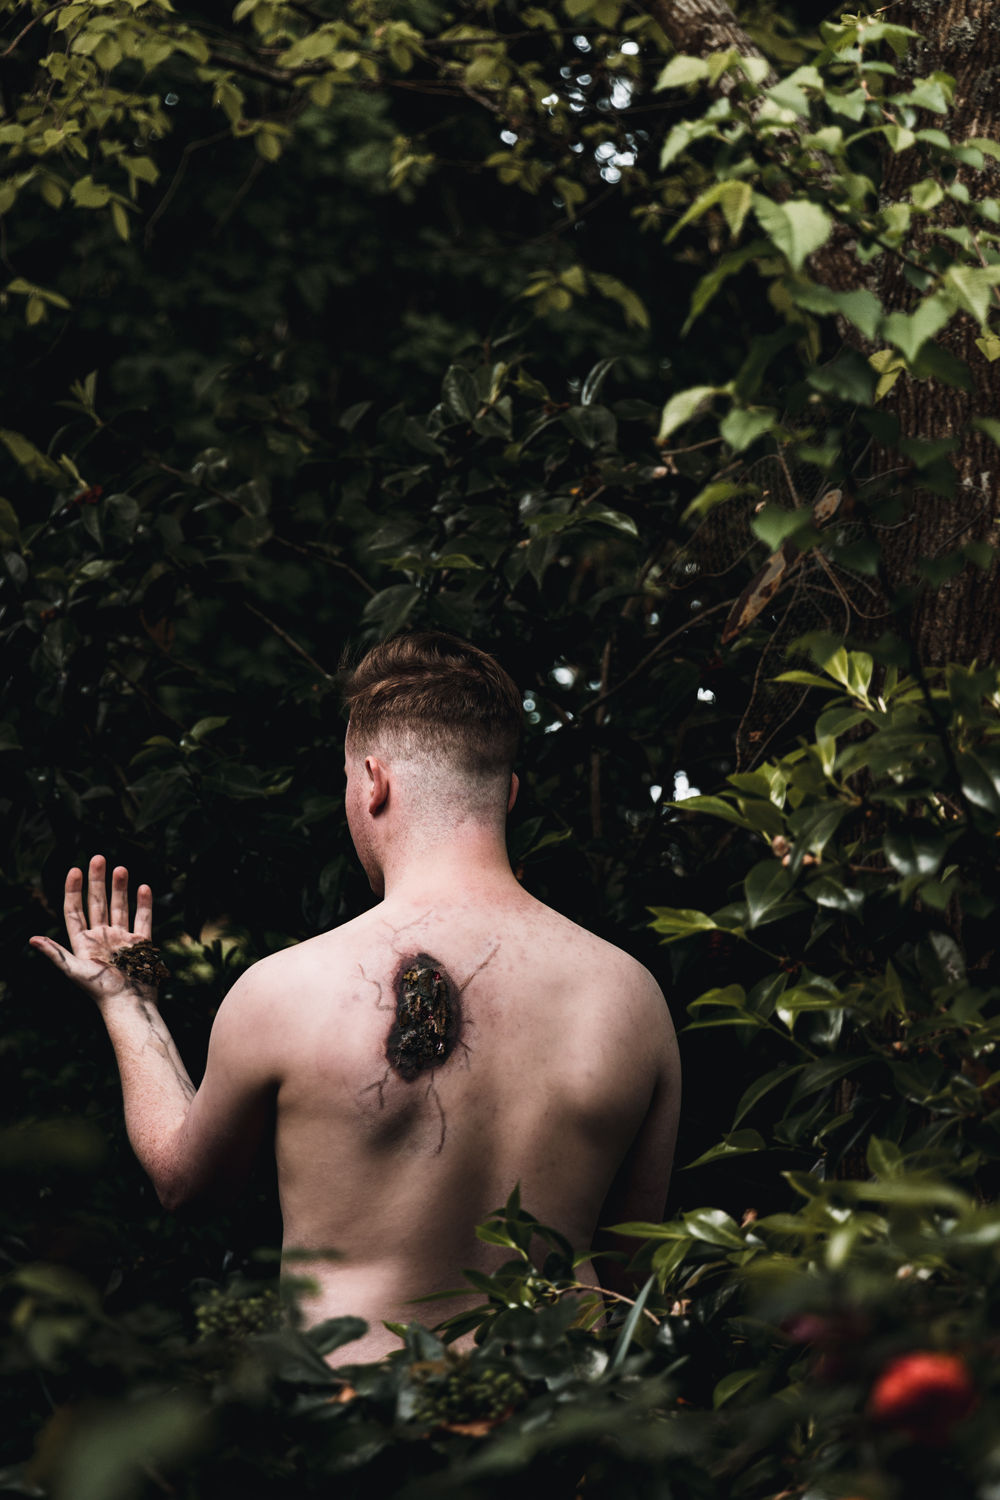 Colour photograph of a man in bush with bark on body. Man faces away from camera.